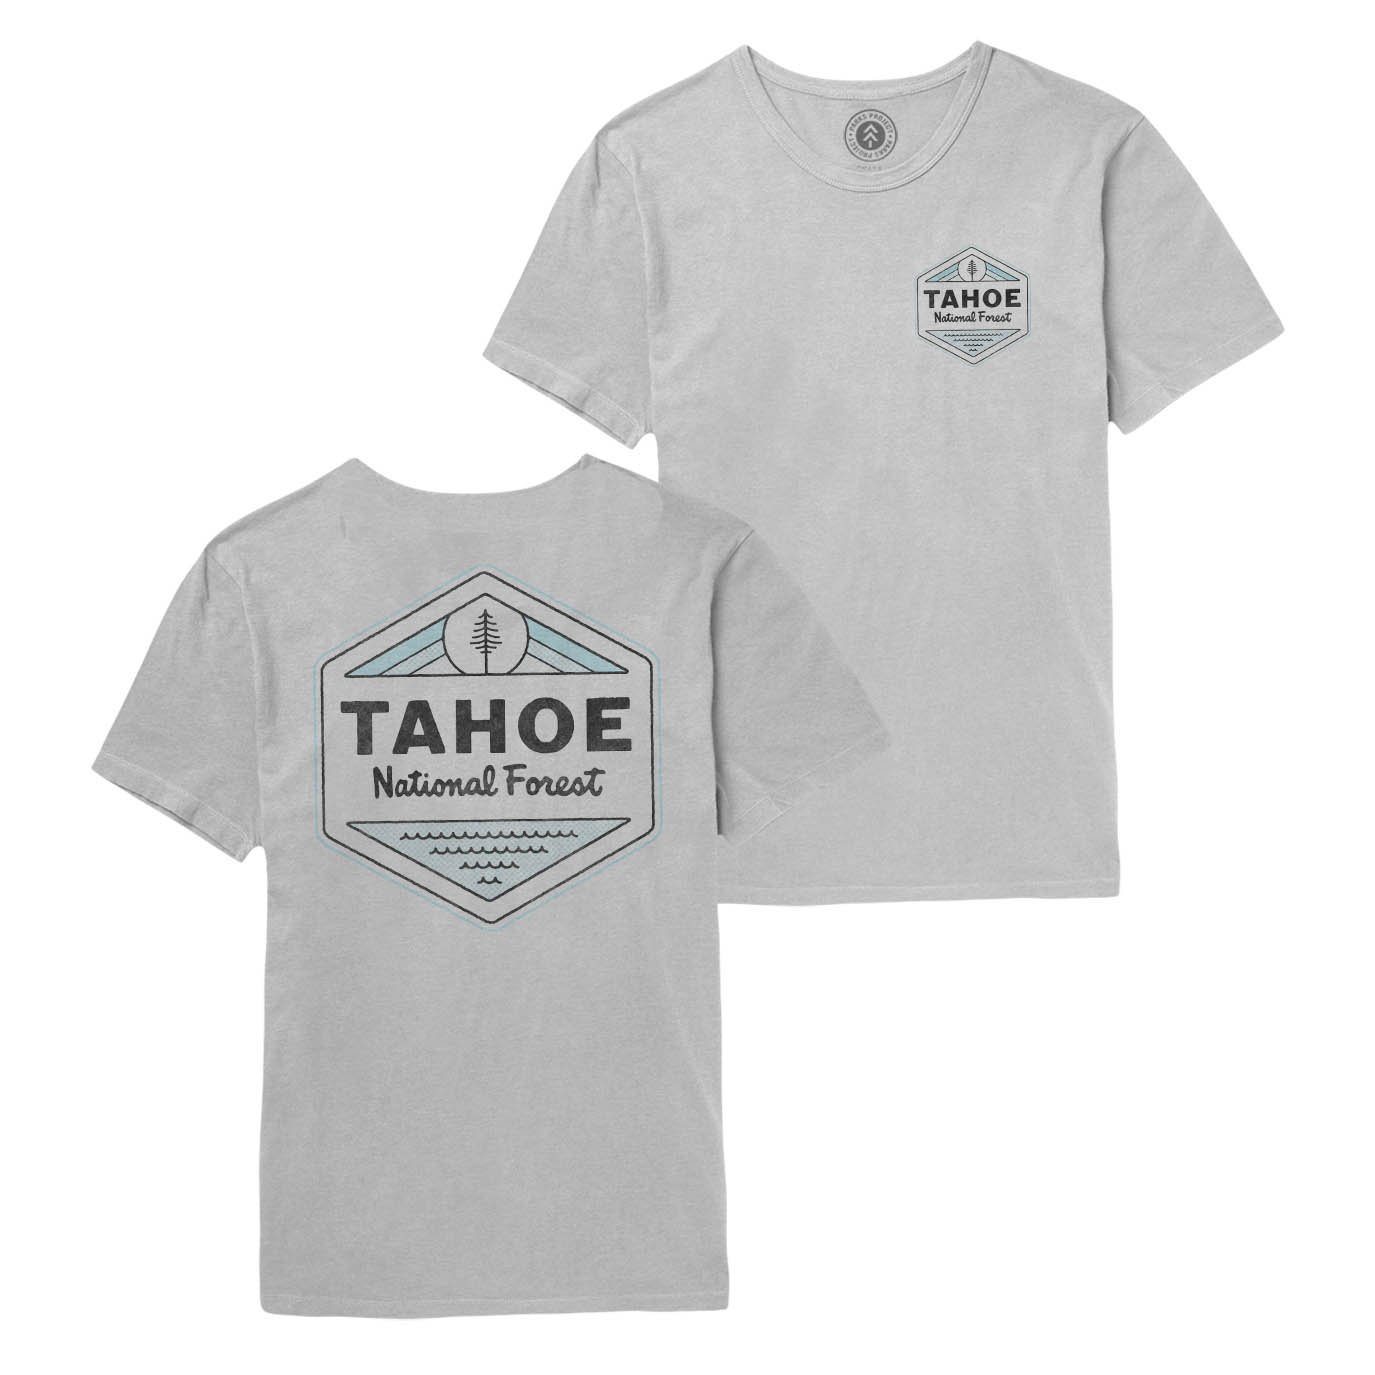 Lake Tahoe Graphic Tee Parks Project 